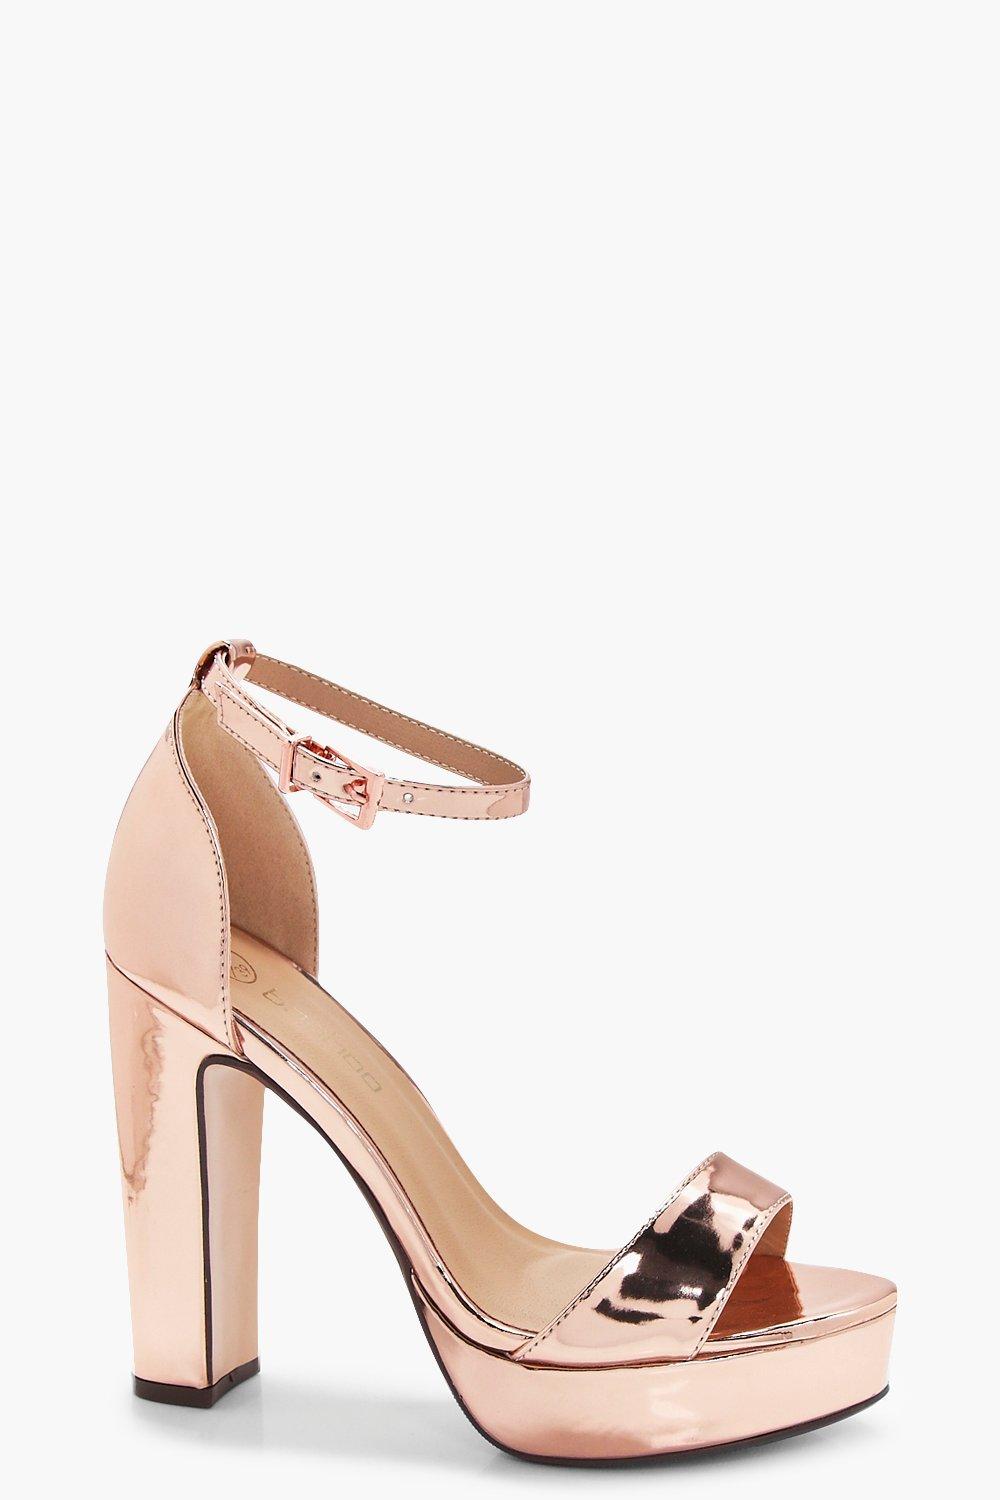 rose gold shoes canada